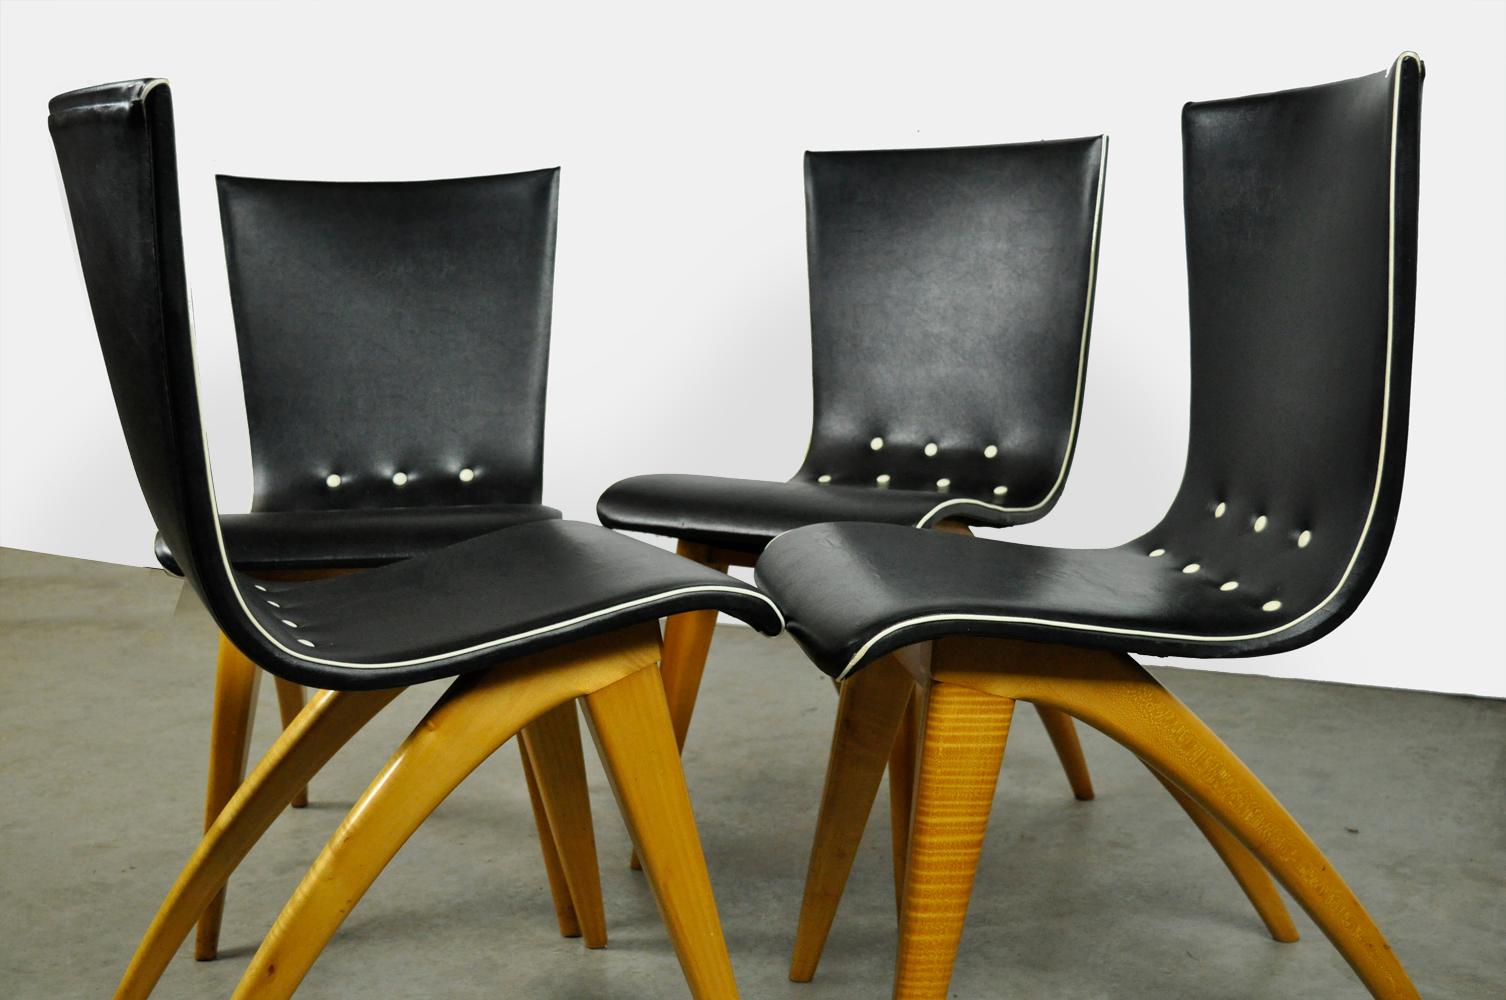 Set wingback dining chairs (4) by G.J. van Os for van Os Culemborg, 1950s For Sale 5